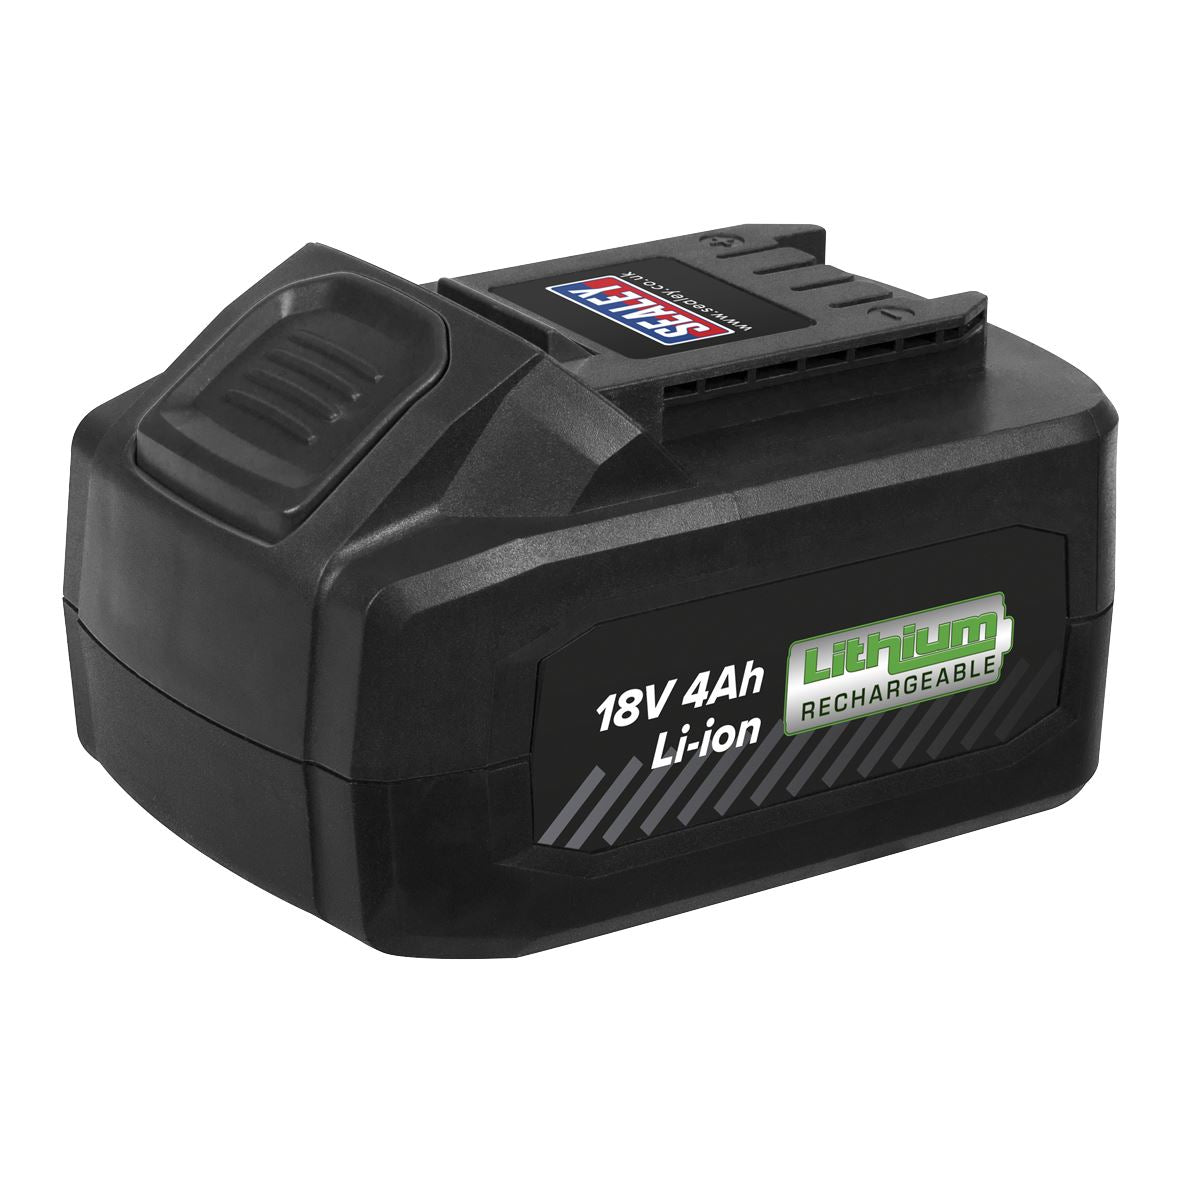 Sealey Power Tool Battery 18V 4Ah Lithium-ion for CP650LI & CP650LIHV